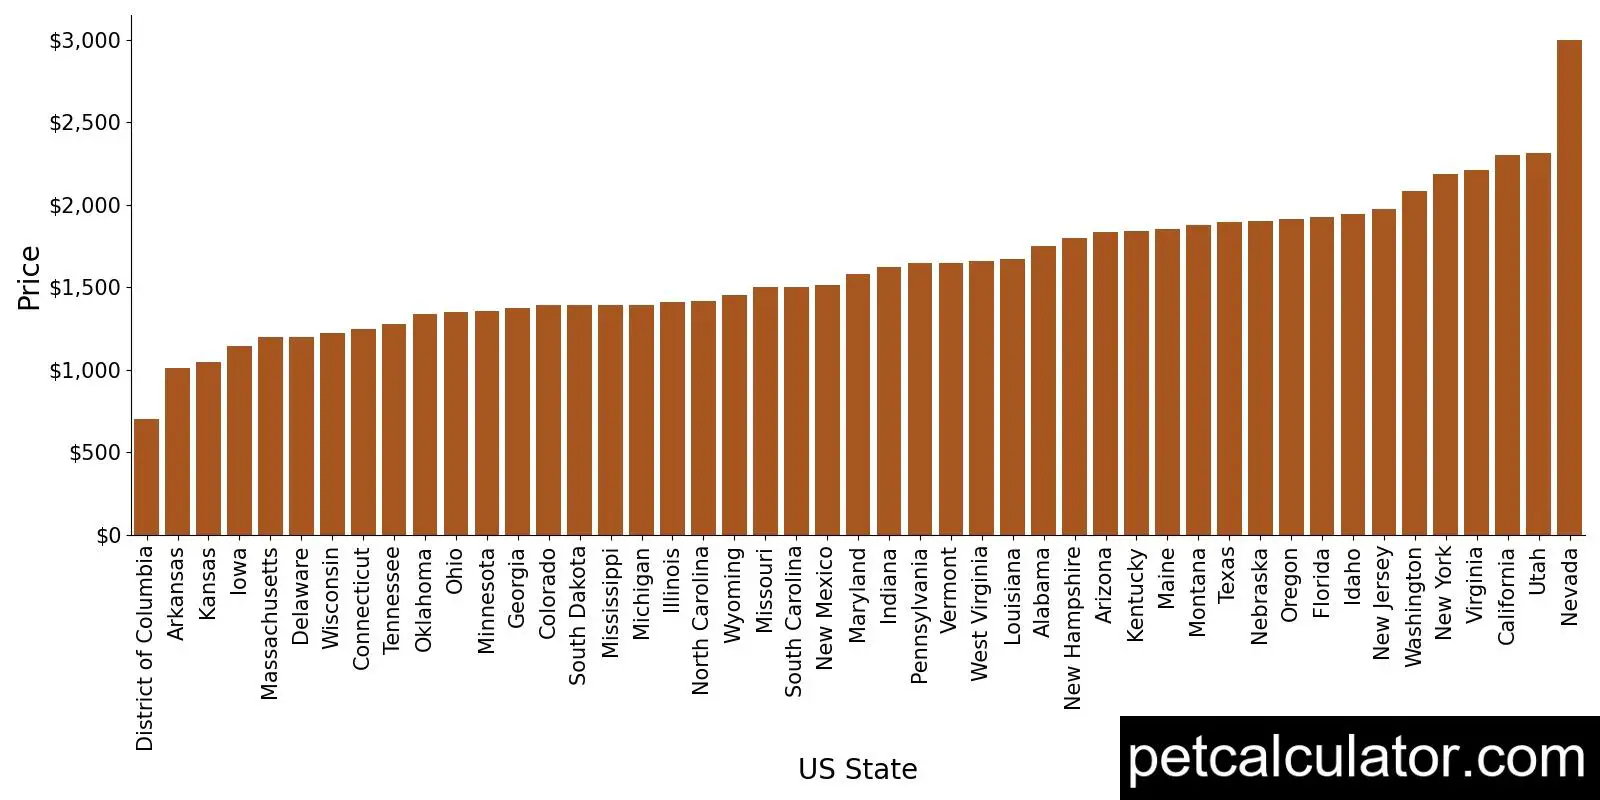 Price of Labradoodle by US State 